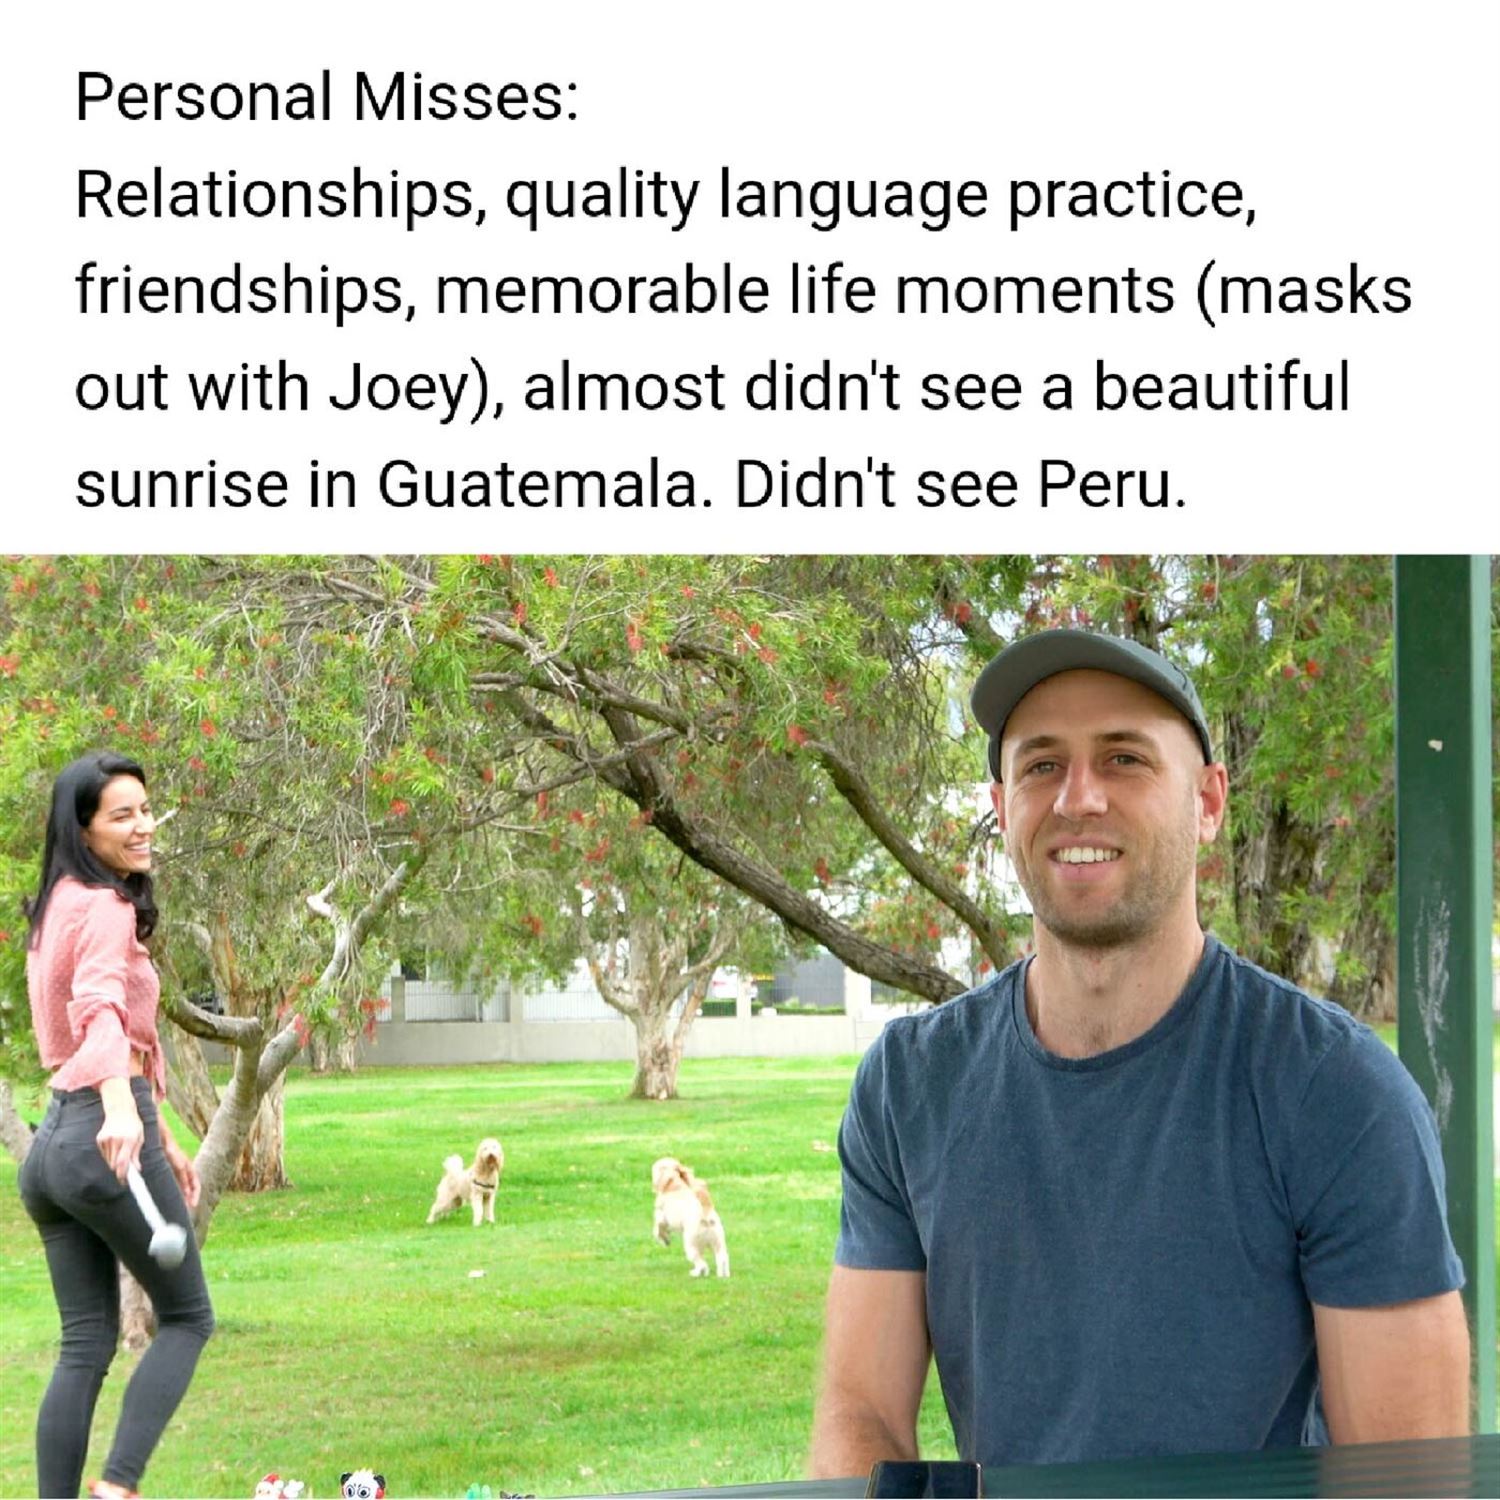 Personal misses